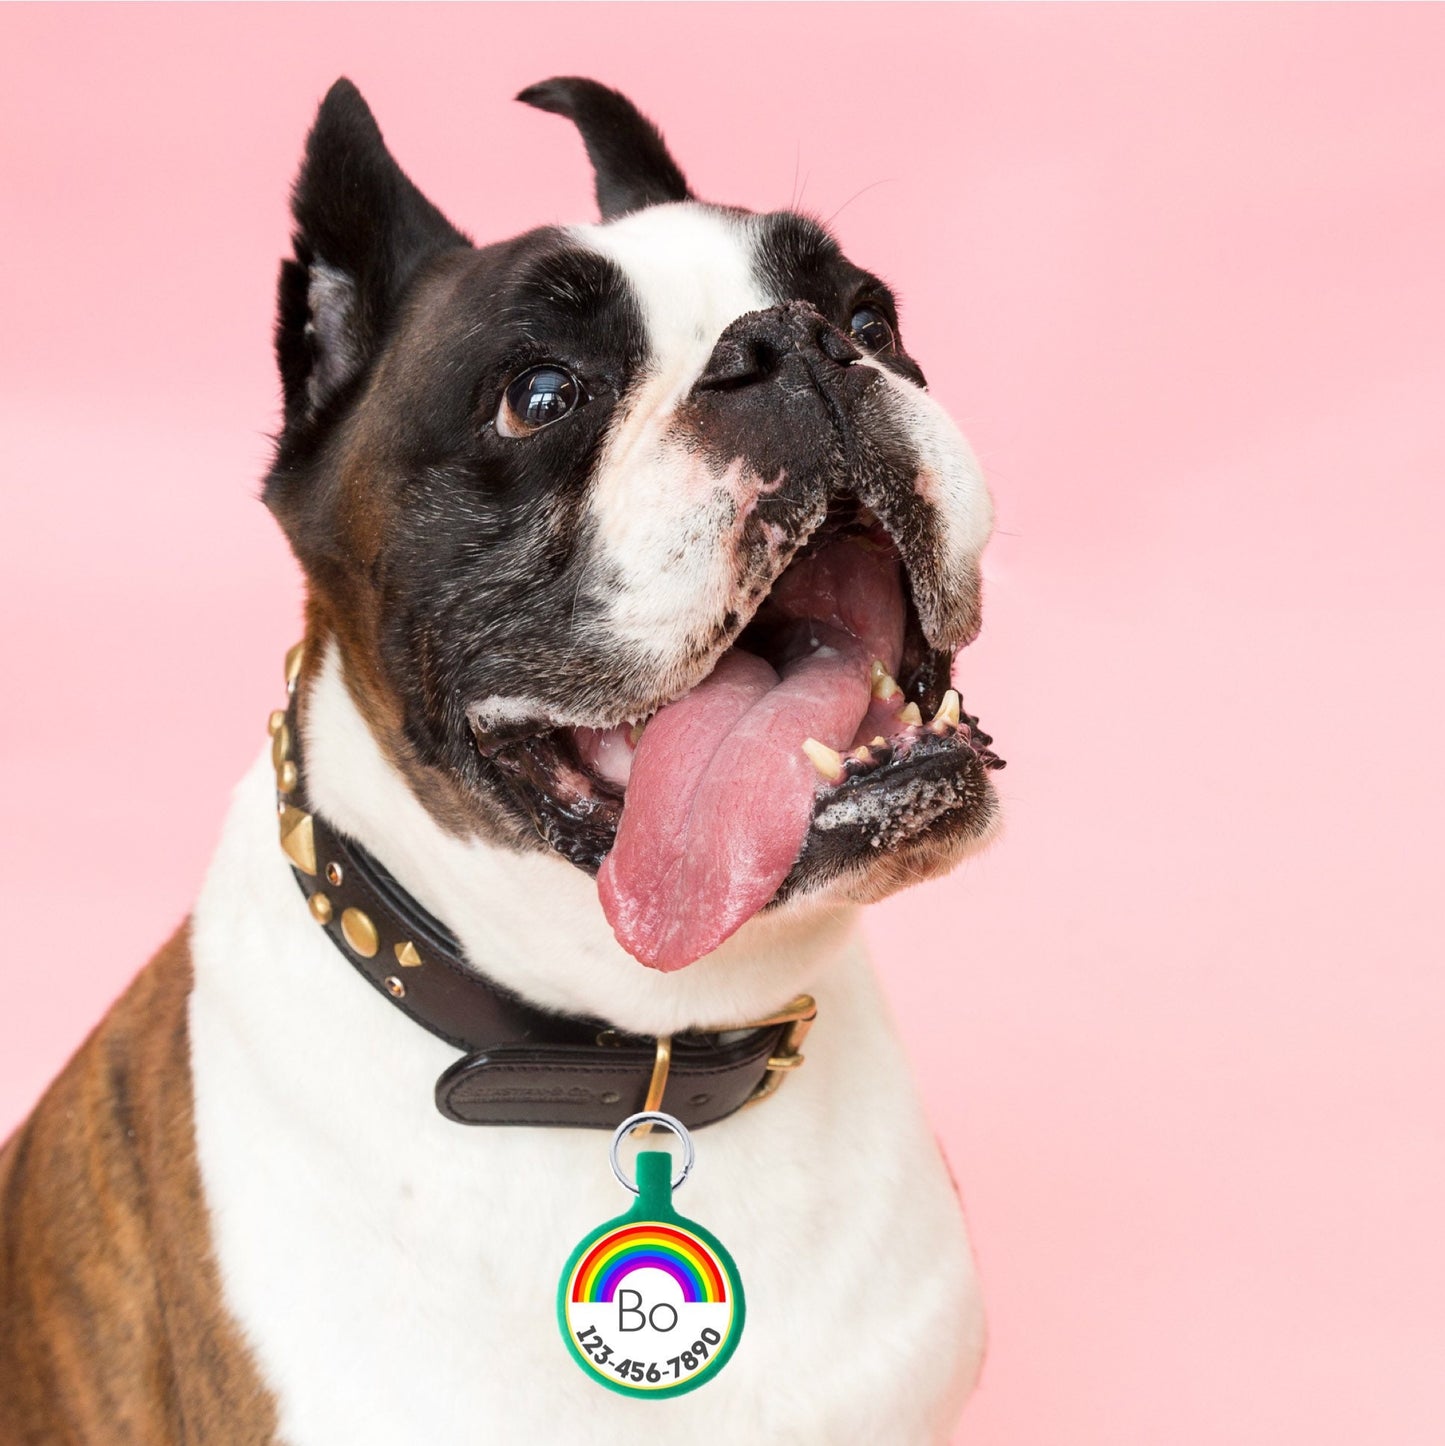 Pastel or Bold Rainbow Personalized Dog ID Pet Tag Custom Pet Tag You Choose Tag Size & Colors